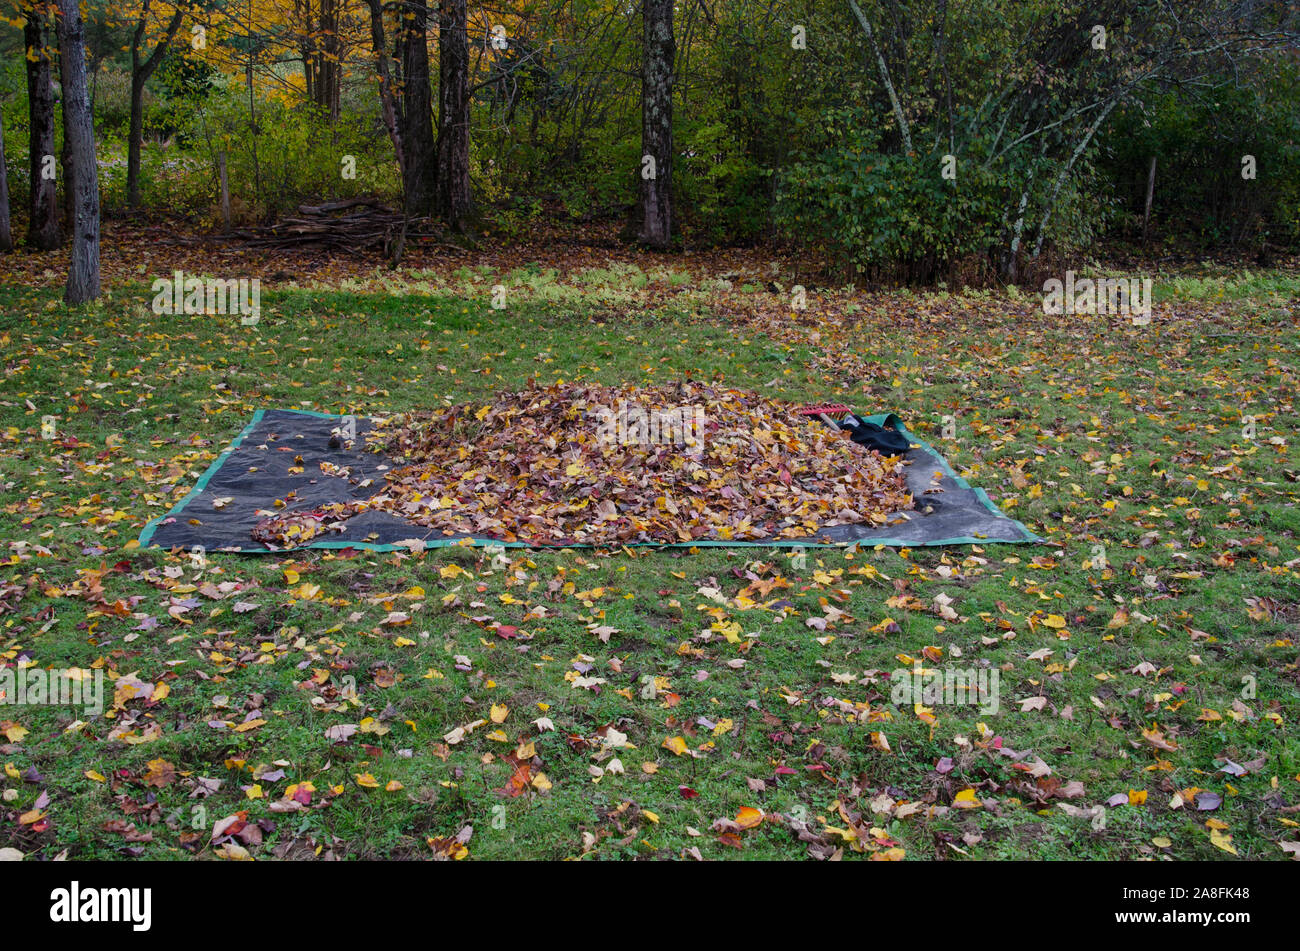 Pile of leaves raked onto ground cover or canvas for all clean up, Fall in Maine, USA Stock Photo